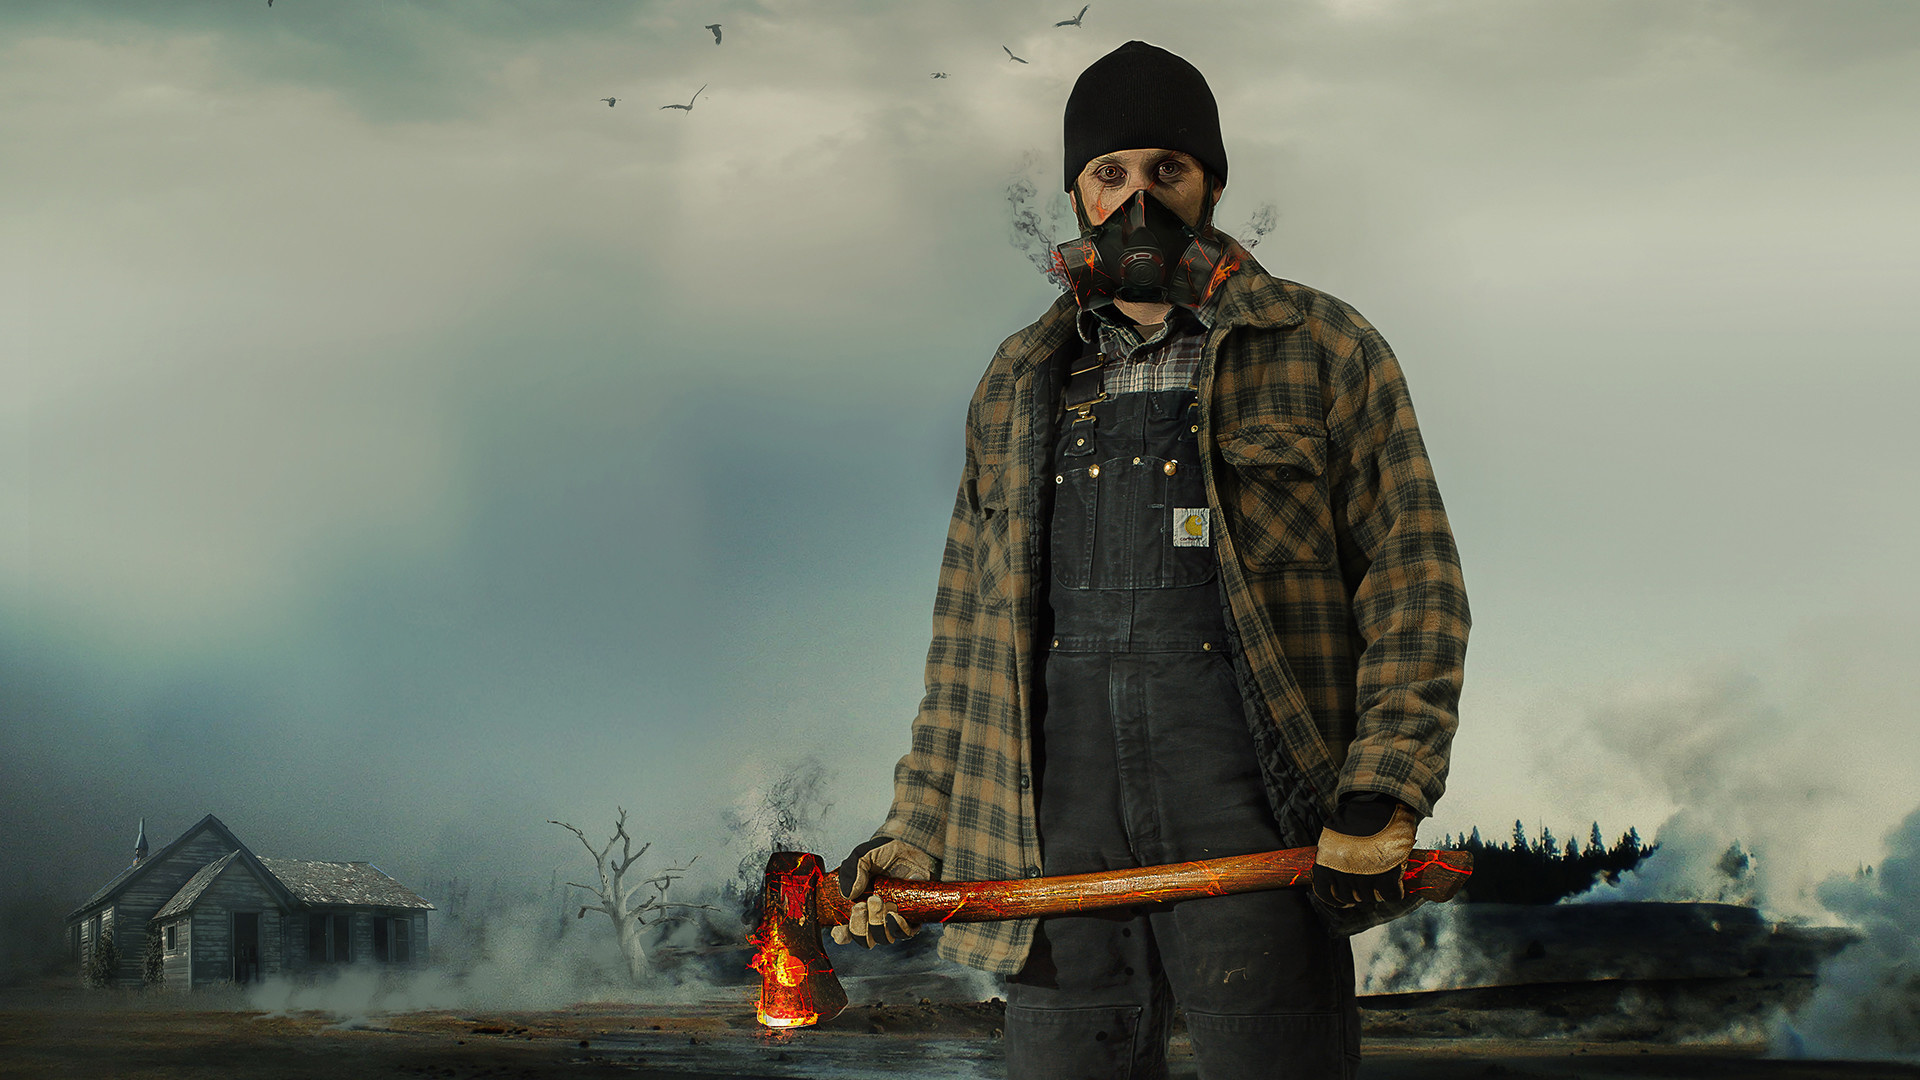 Lumberjack: A man engaged in chopping firewood, Worker of the logging industry. 1920x1080 Full HD Wallpaper.